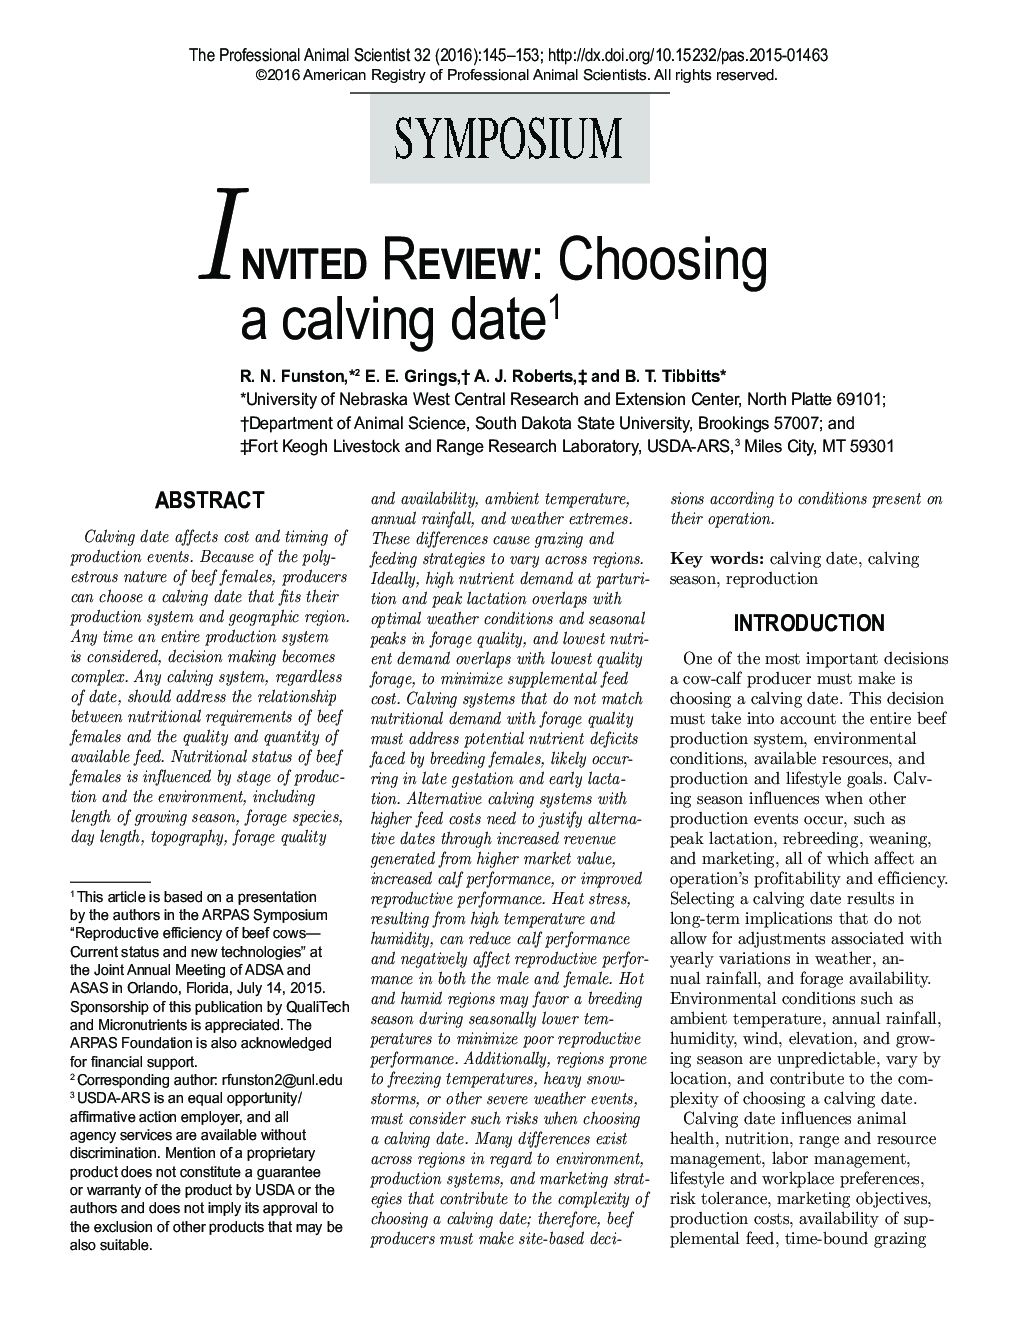 Invited Review: Choosing a calving date1